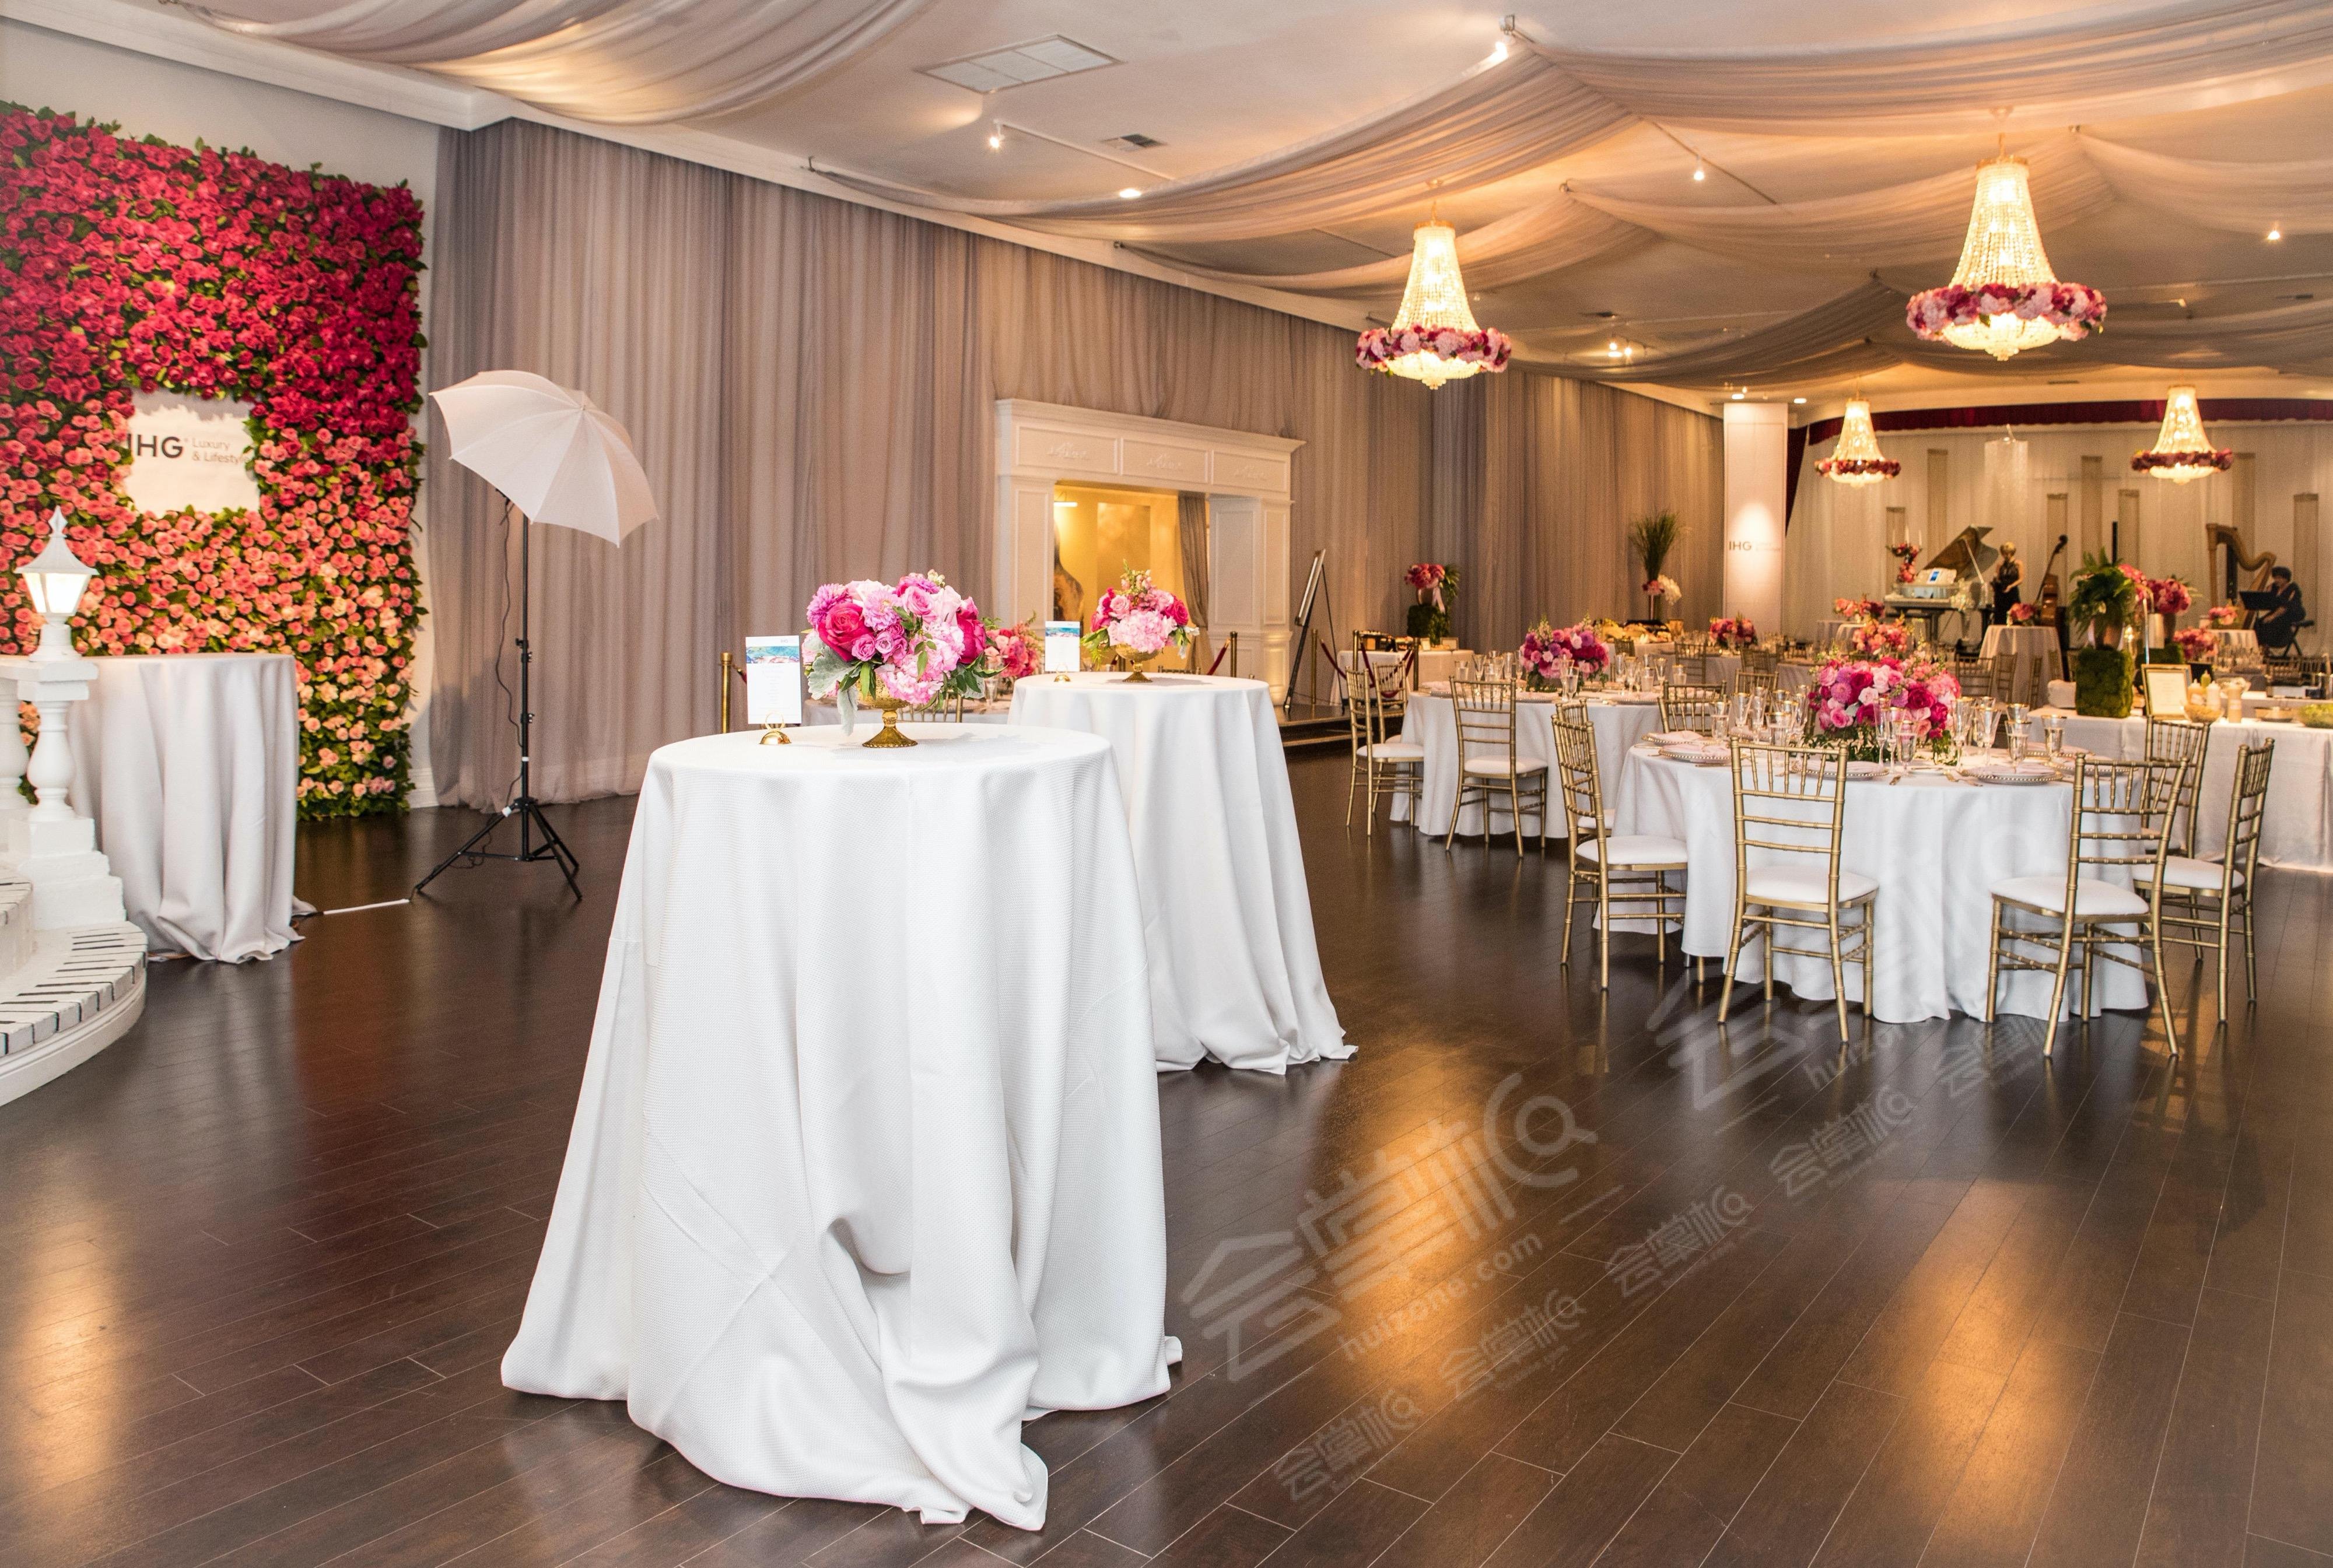 Crystal Ballroom Event Space at The Liberace Mansion